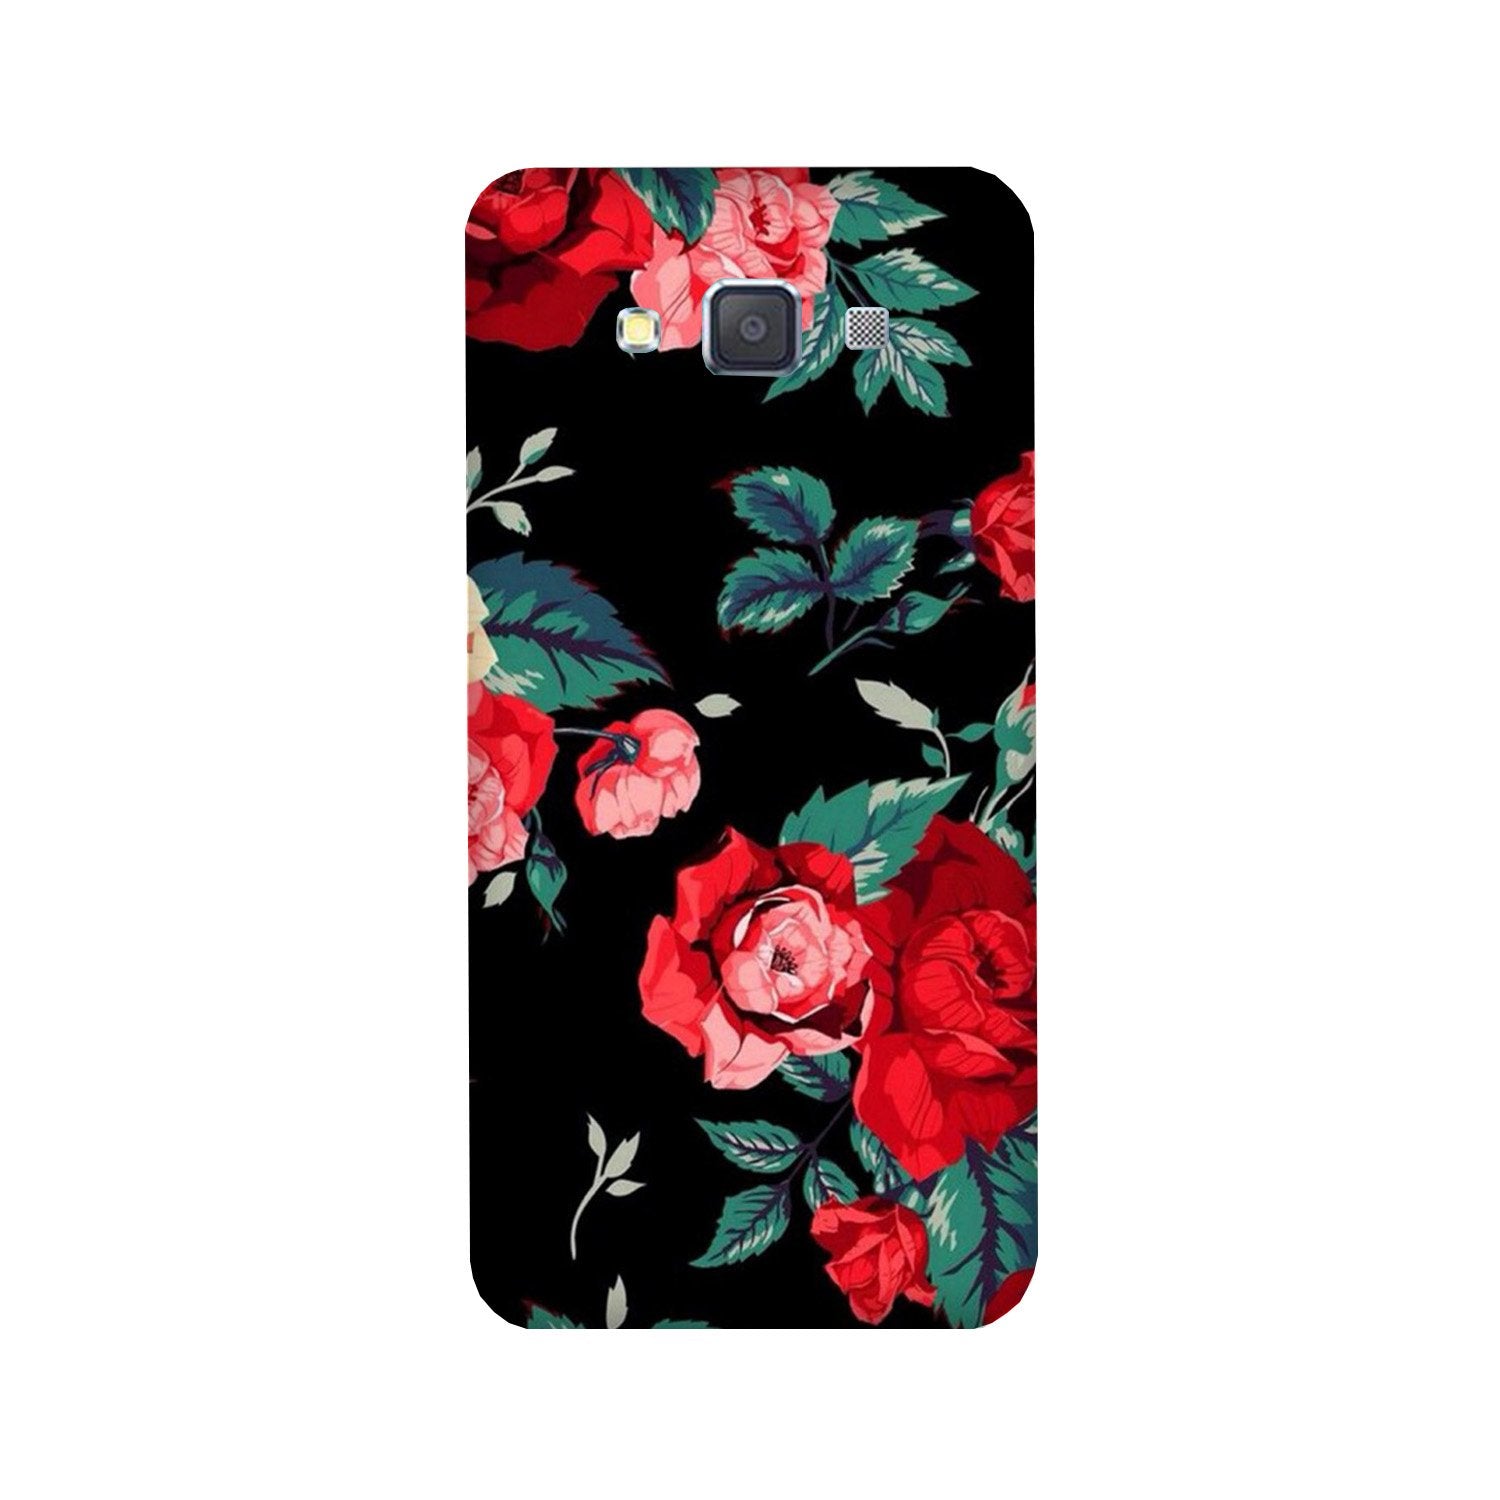 Red Rose2 Case for Galaxy Grand 2